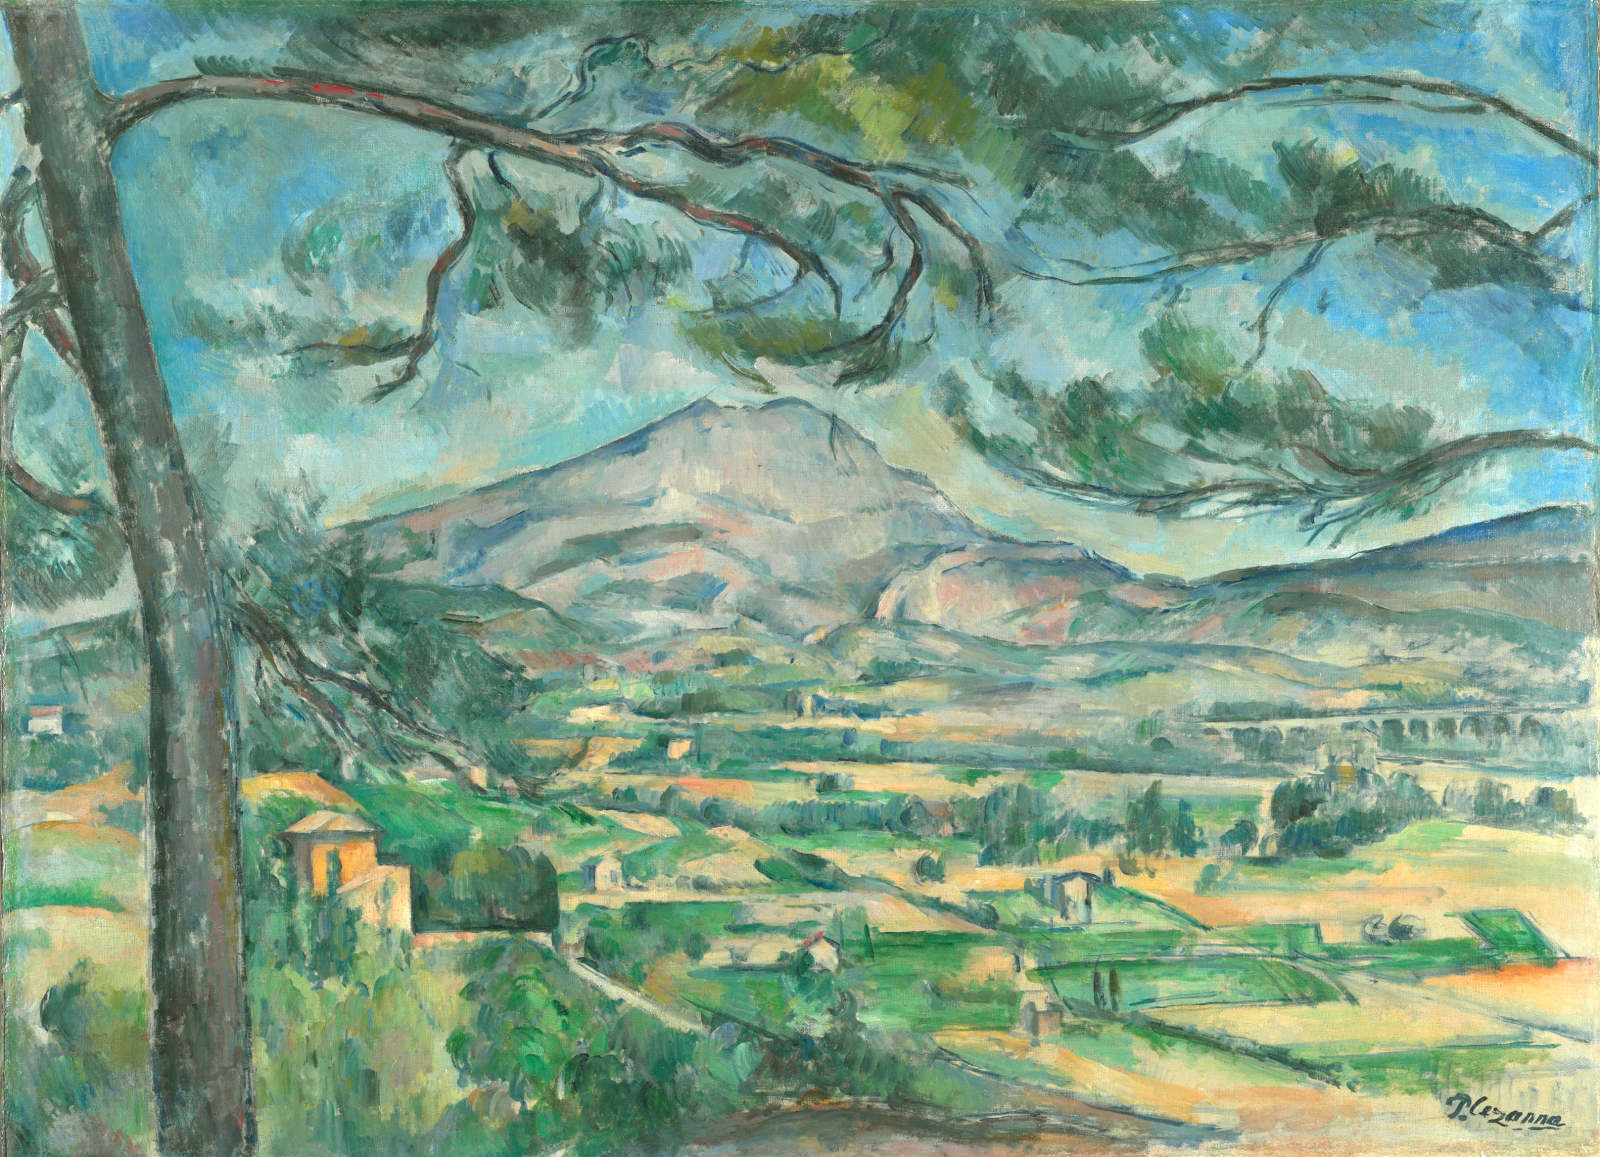 Montagne Sainte-Victoire with Large Pine by Paul Cézanne - 1887 The Courtauld Gallery